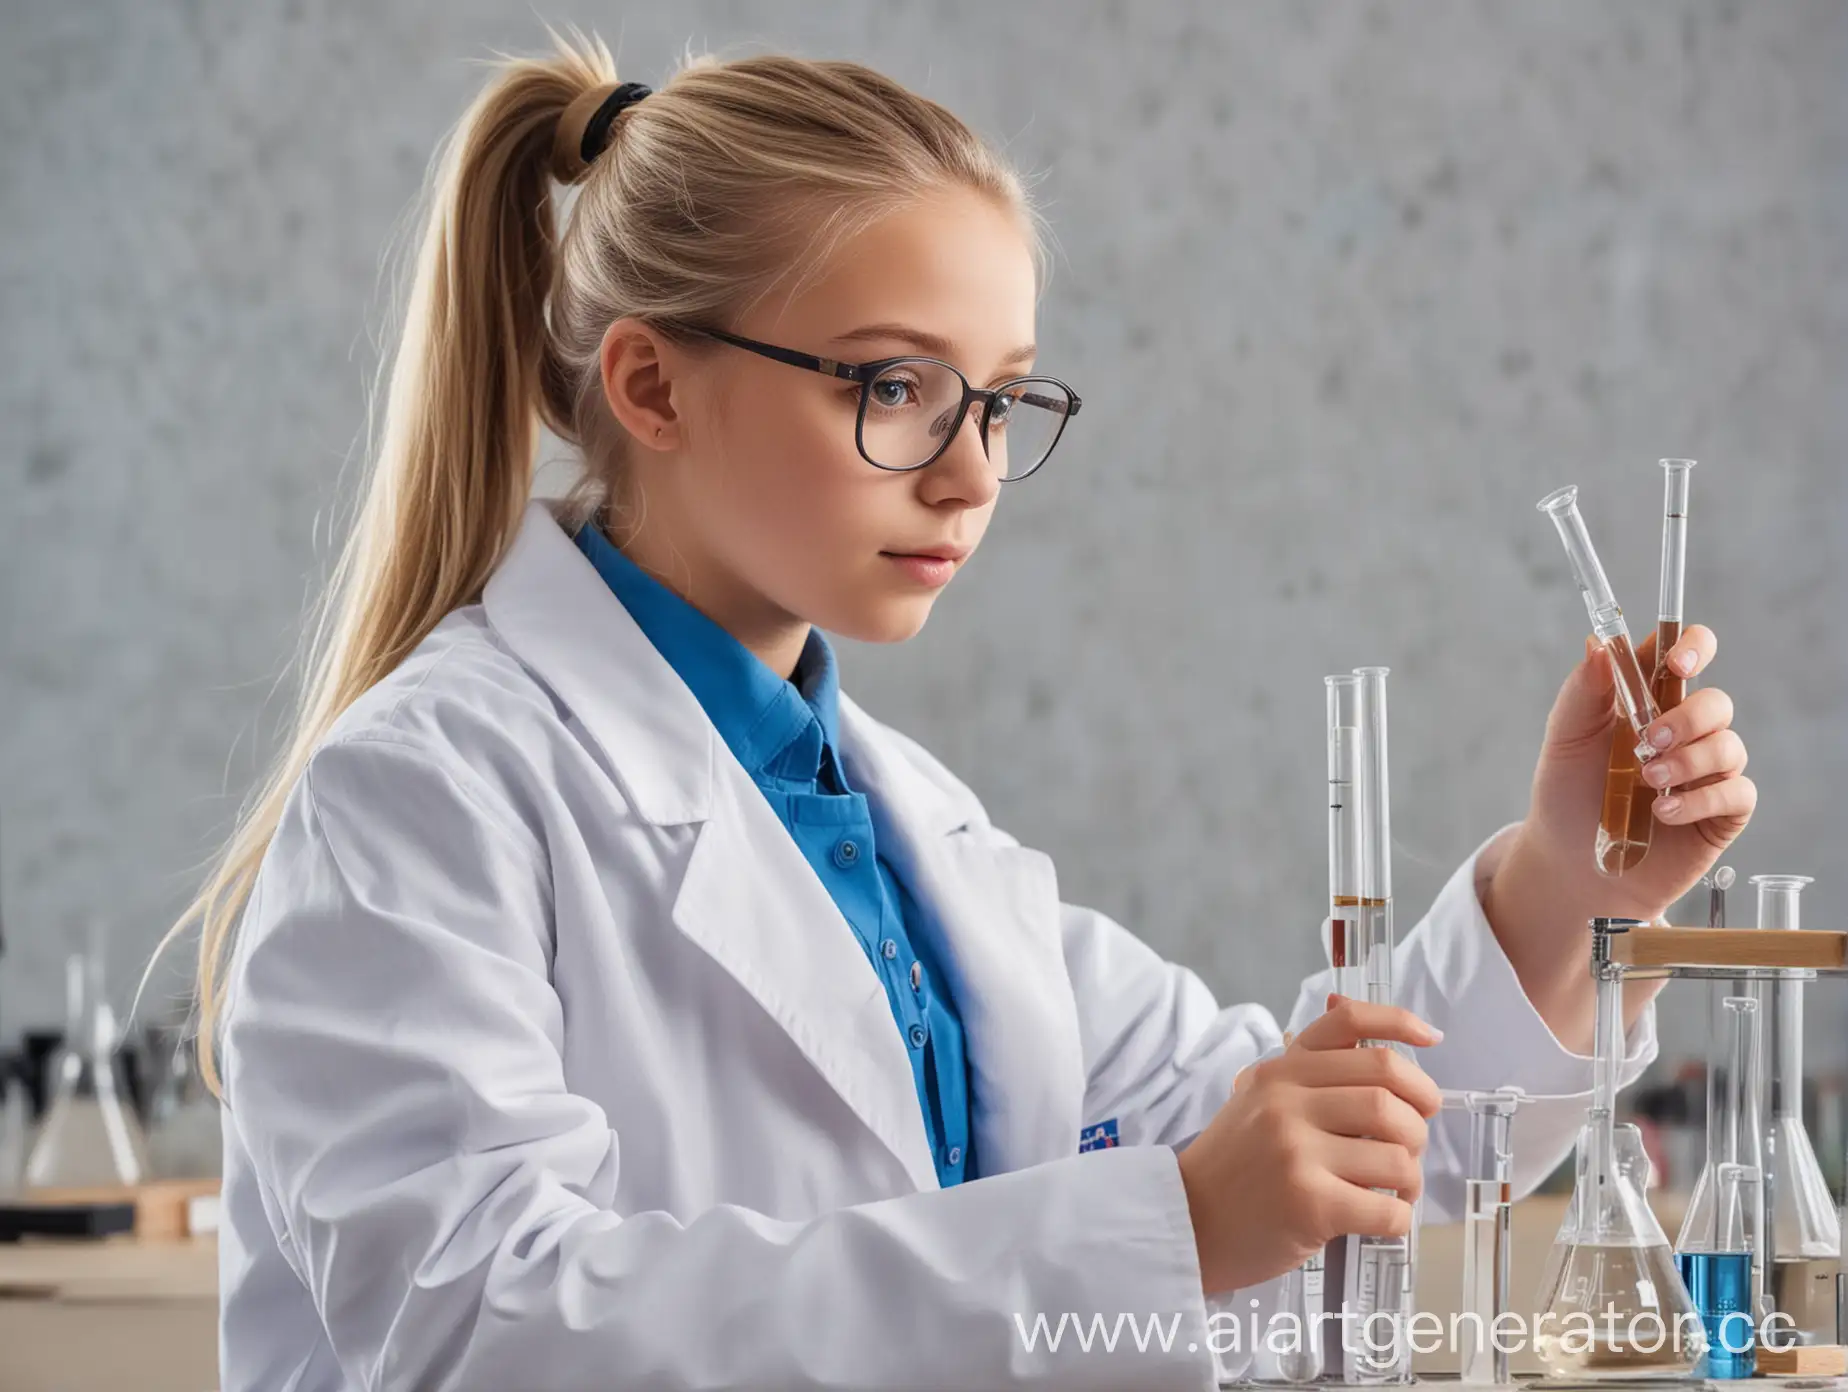 Blonde-Young-Girl-in-Chemistry-Classroom-Conducting-Experiments-with-Flasks-and-Test-Tubes